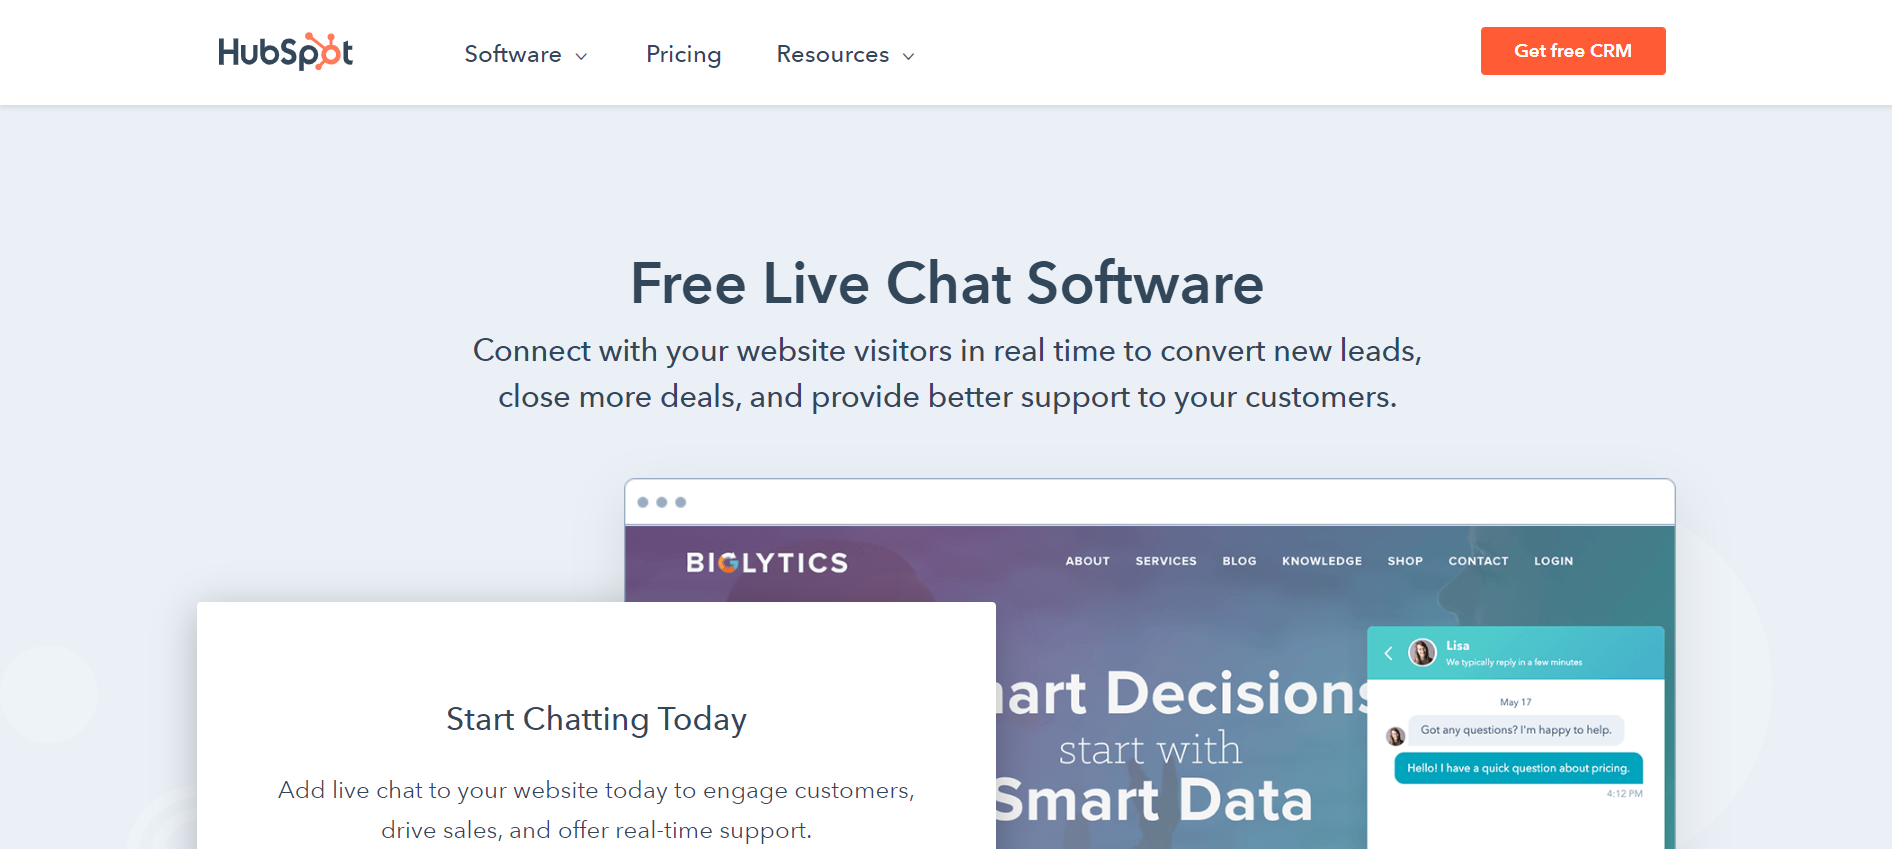 Free Live Chat Software HubSpot